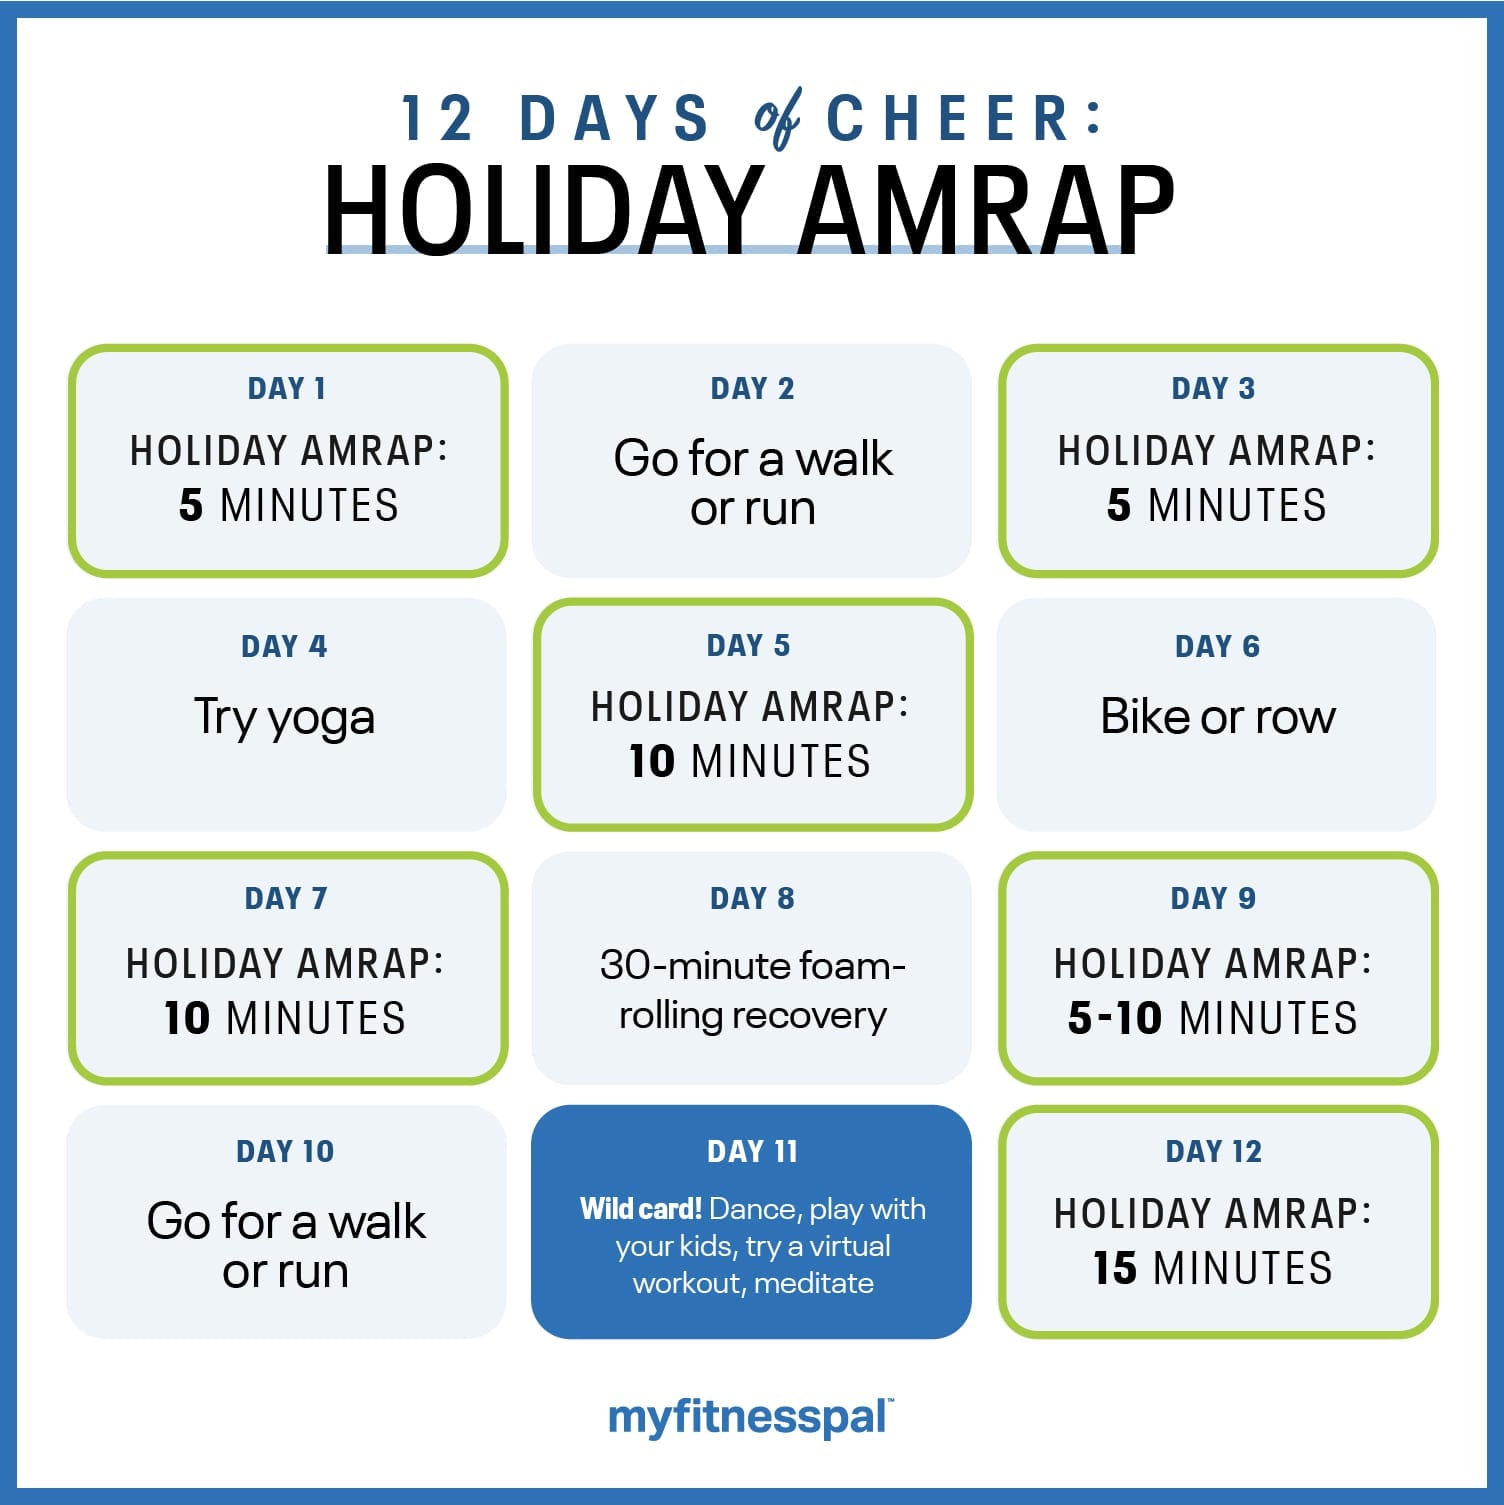 12 Days of Cheer: Holiday AMRAP